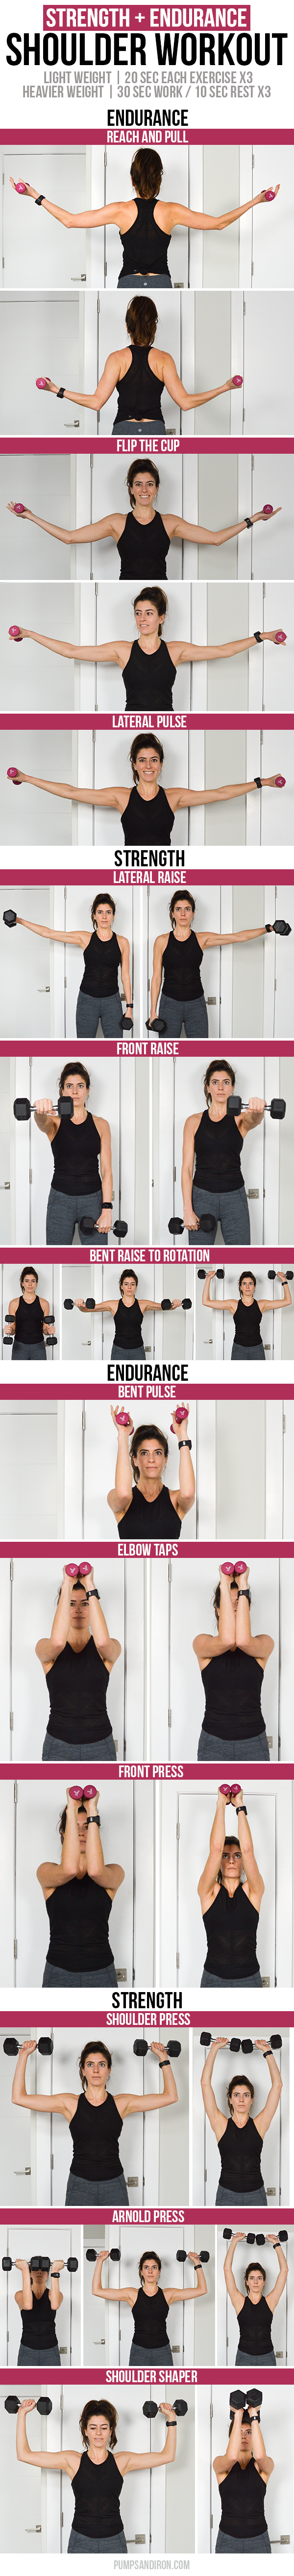 Shoulder Workout - low weight/high rep endurance rounds mixed with heavier strength circuits